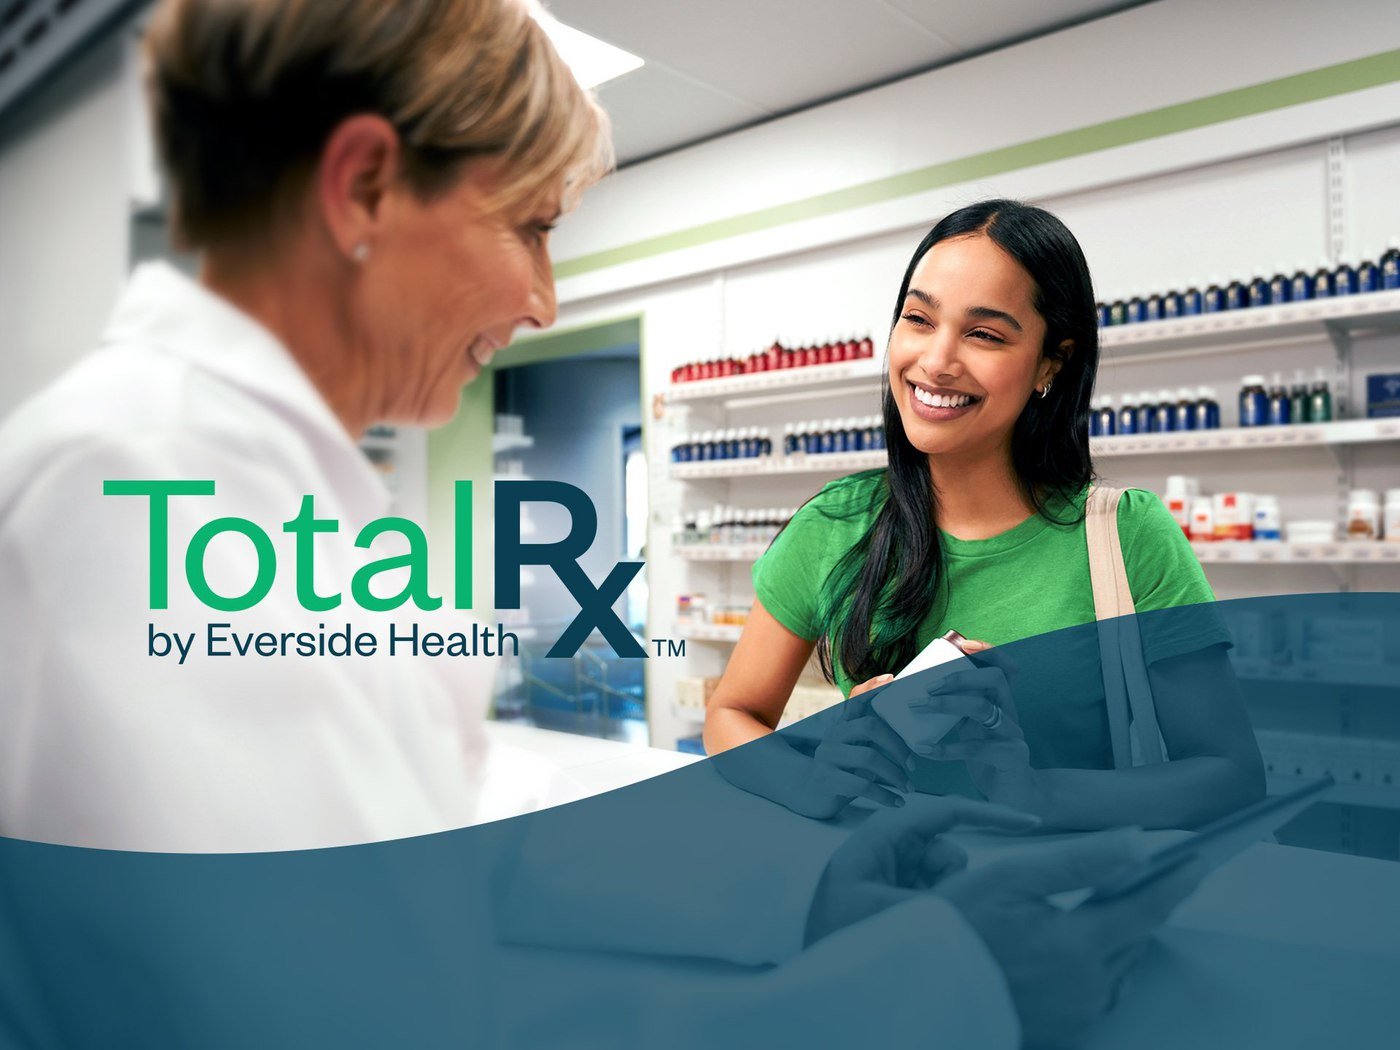 physician and patient smiling at each other, TotalRx logo